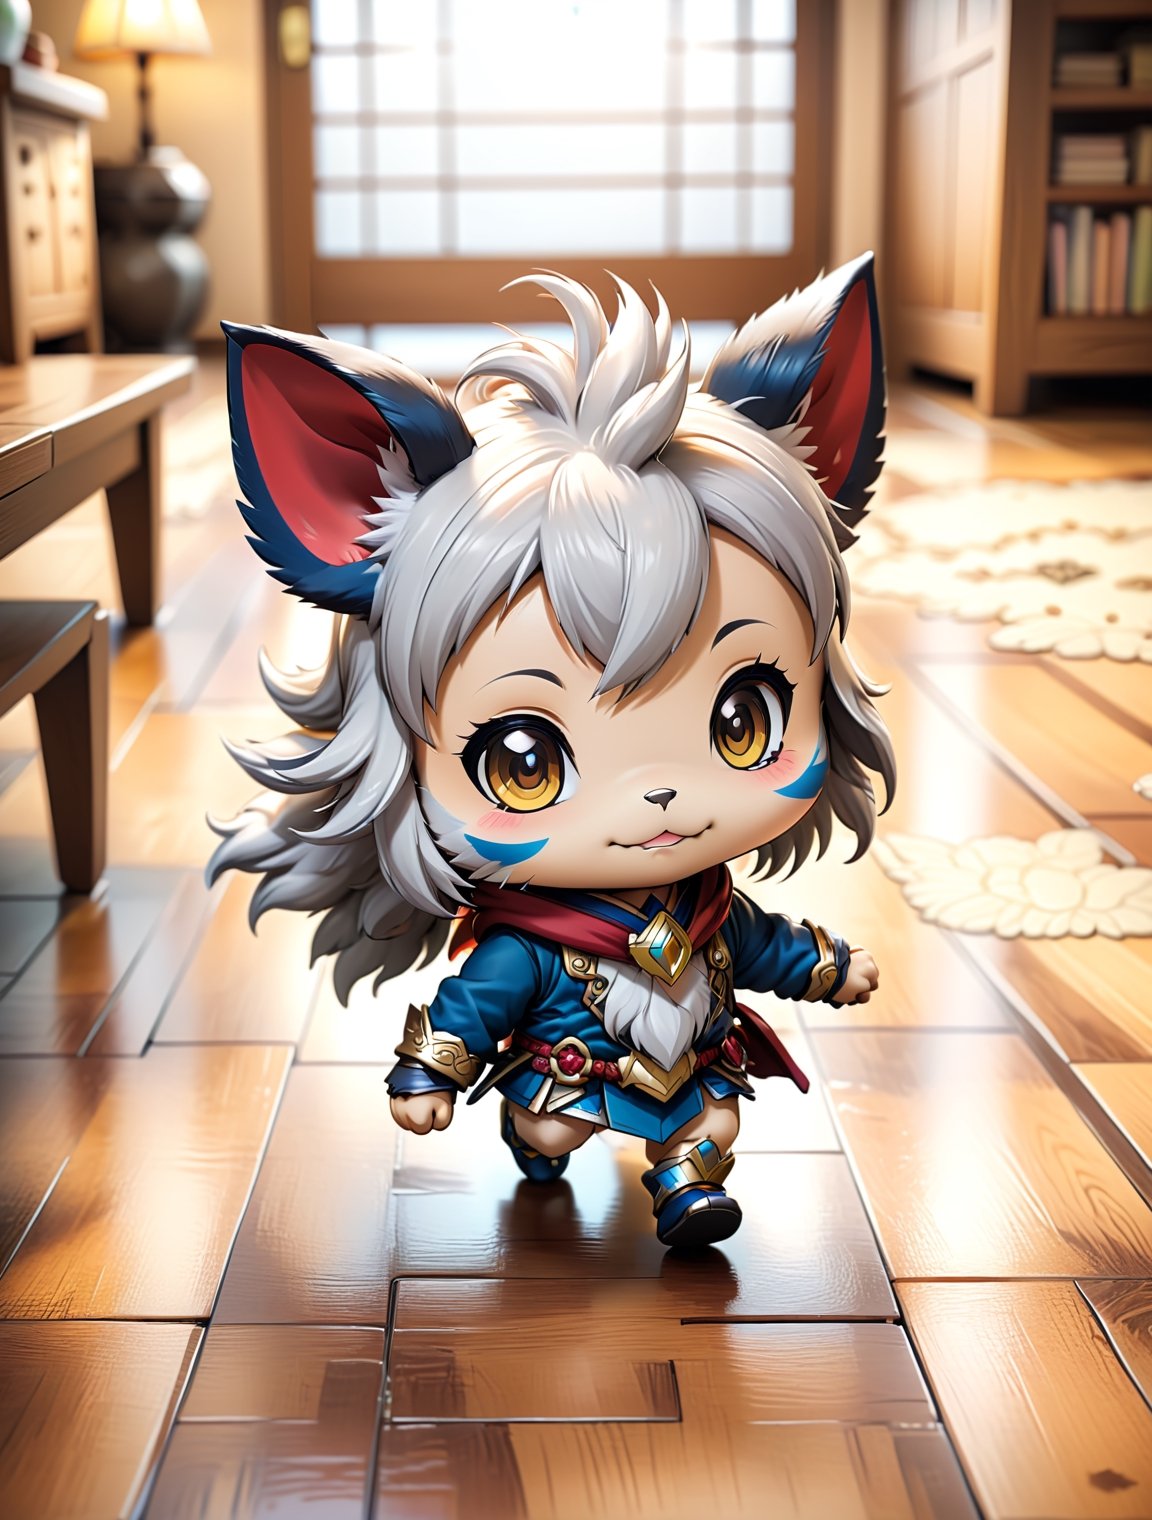 ((anime chibi style)), mythical animal walking on the floor, cozy setting, dynamic angle, depth of field, detail XL, (anime)